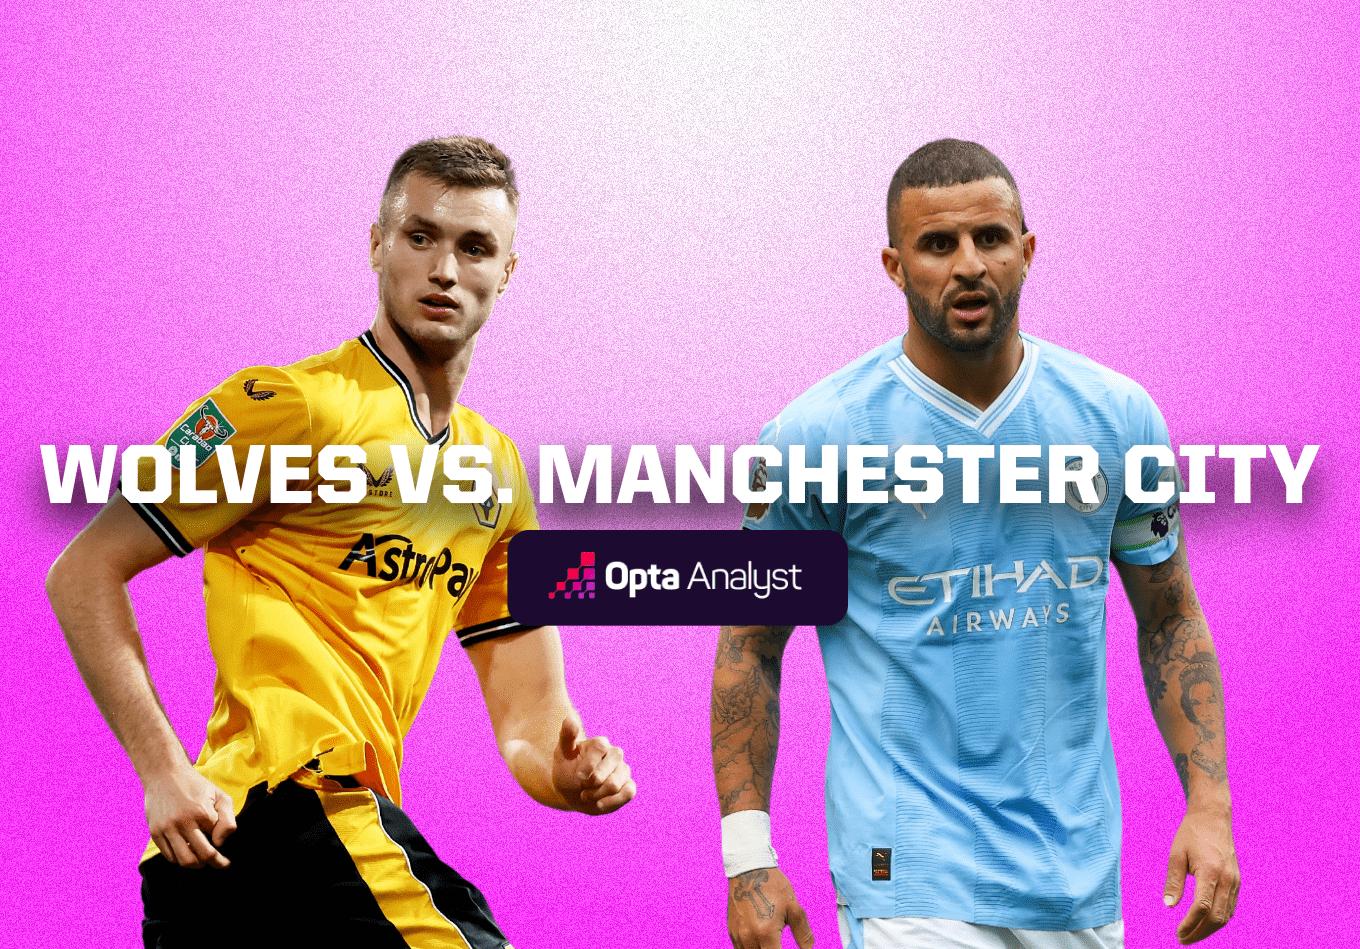 Wolves vs Manchester City: Prediction and Preview